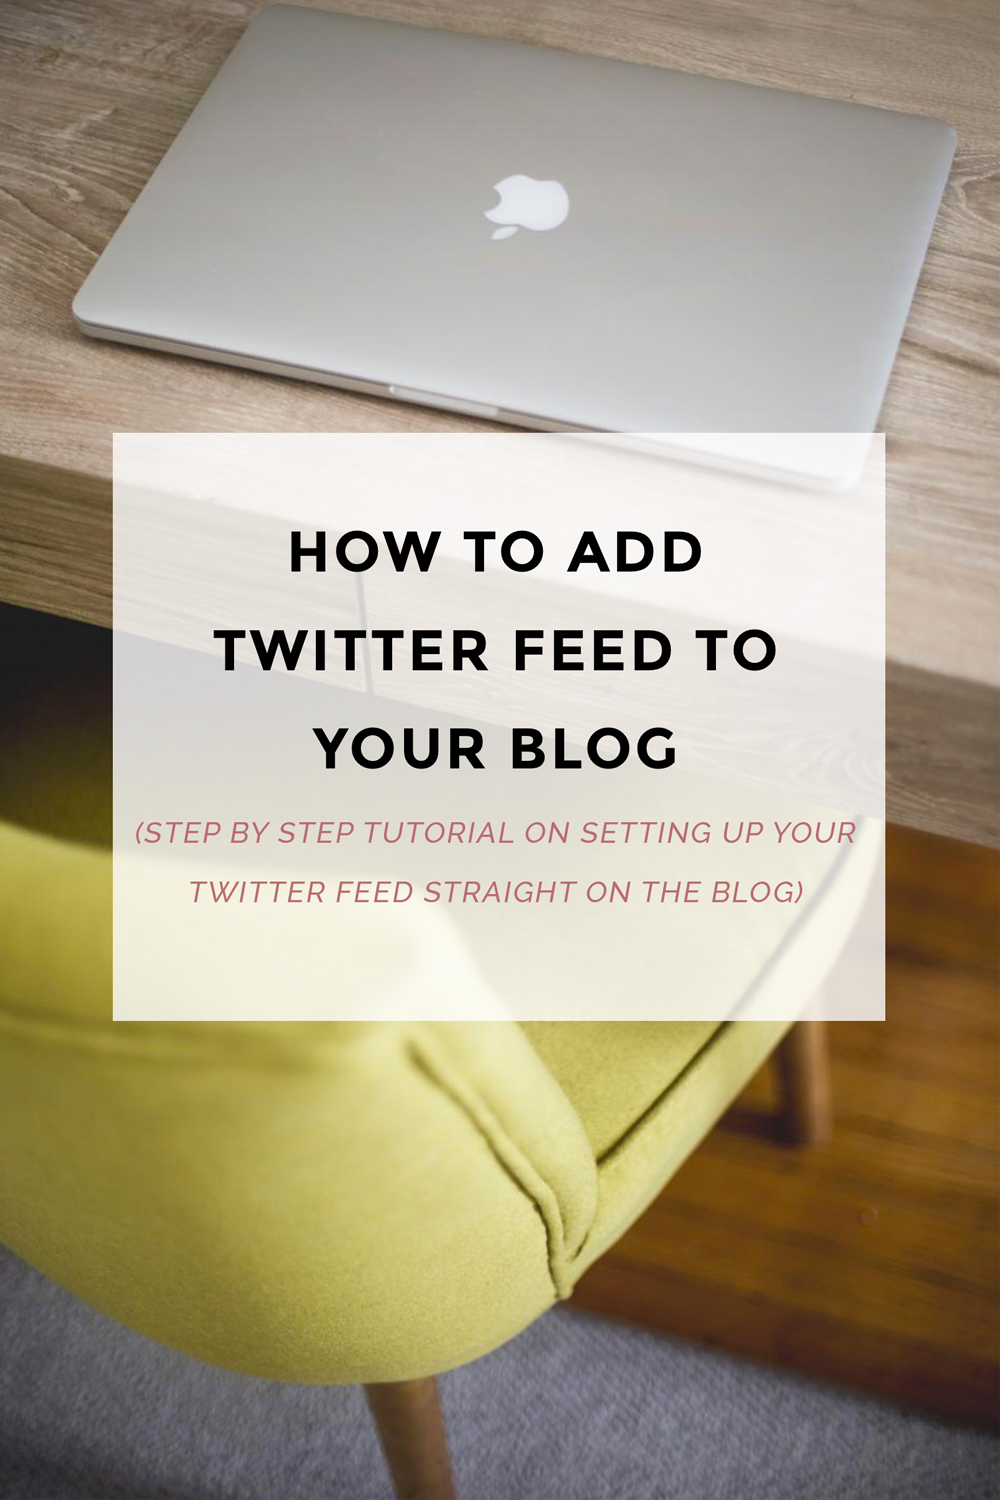 How to Add Twitter Feed to Your Blog?